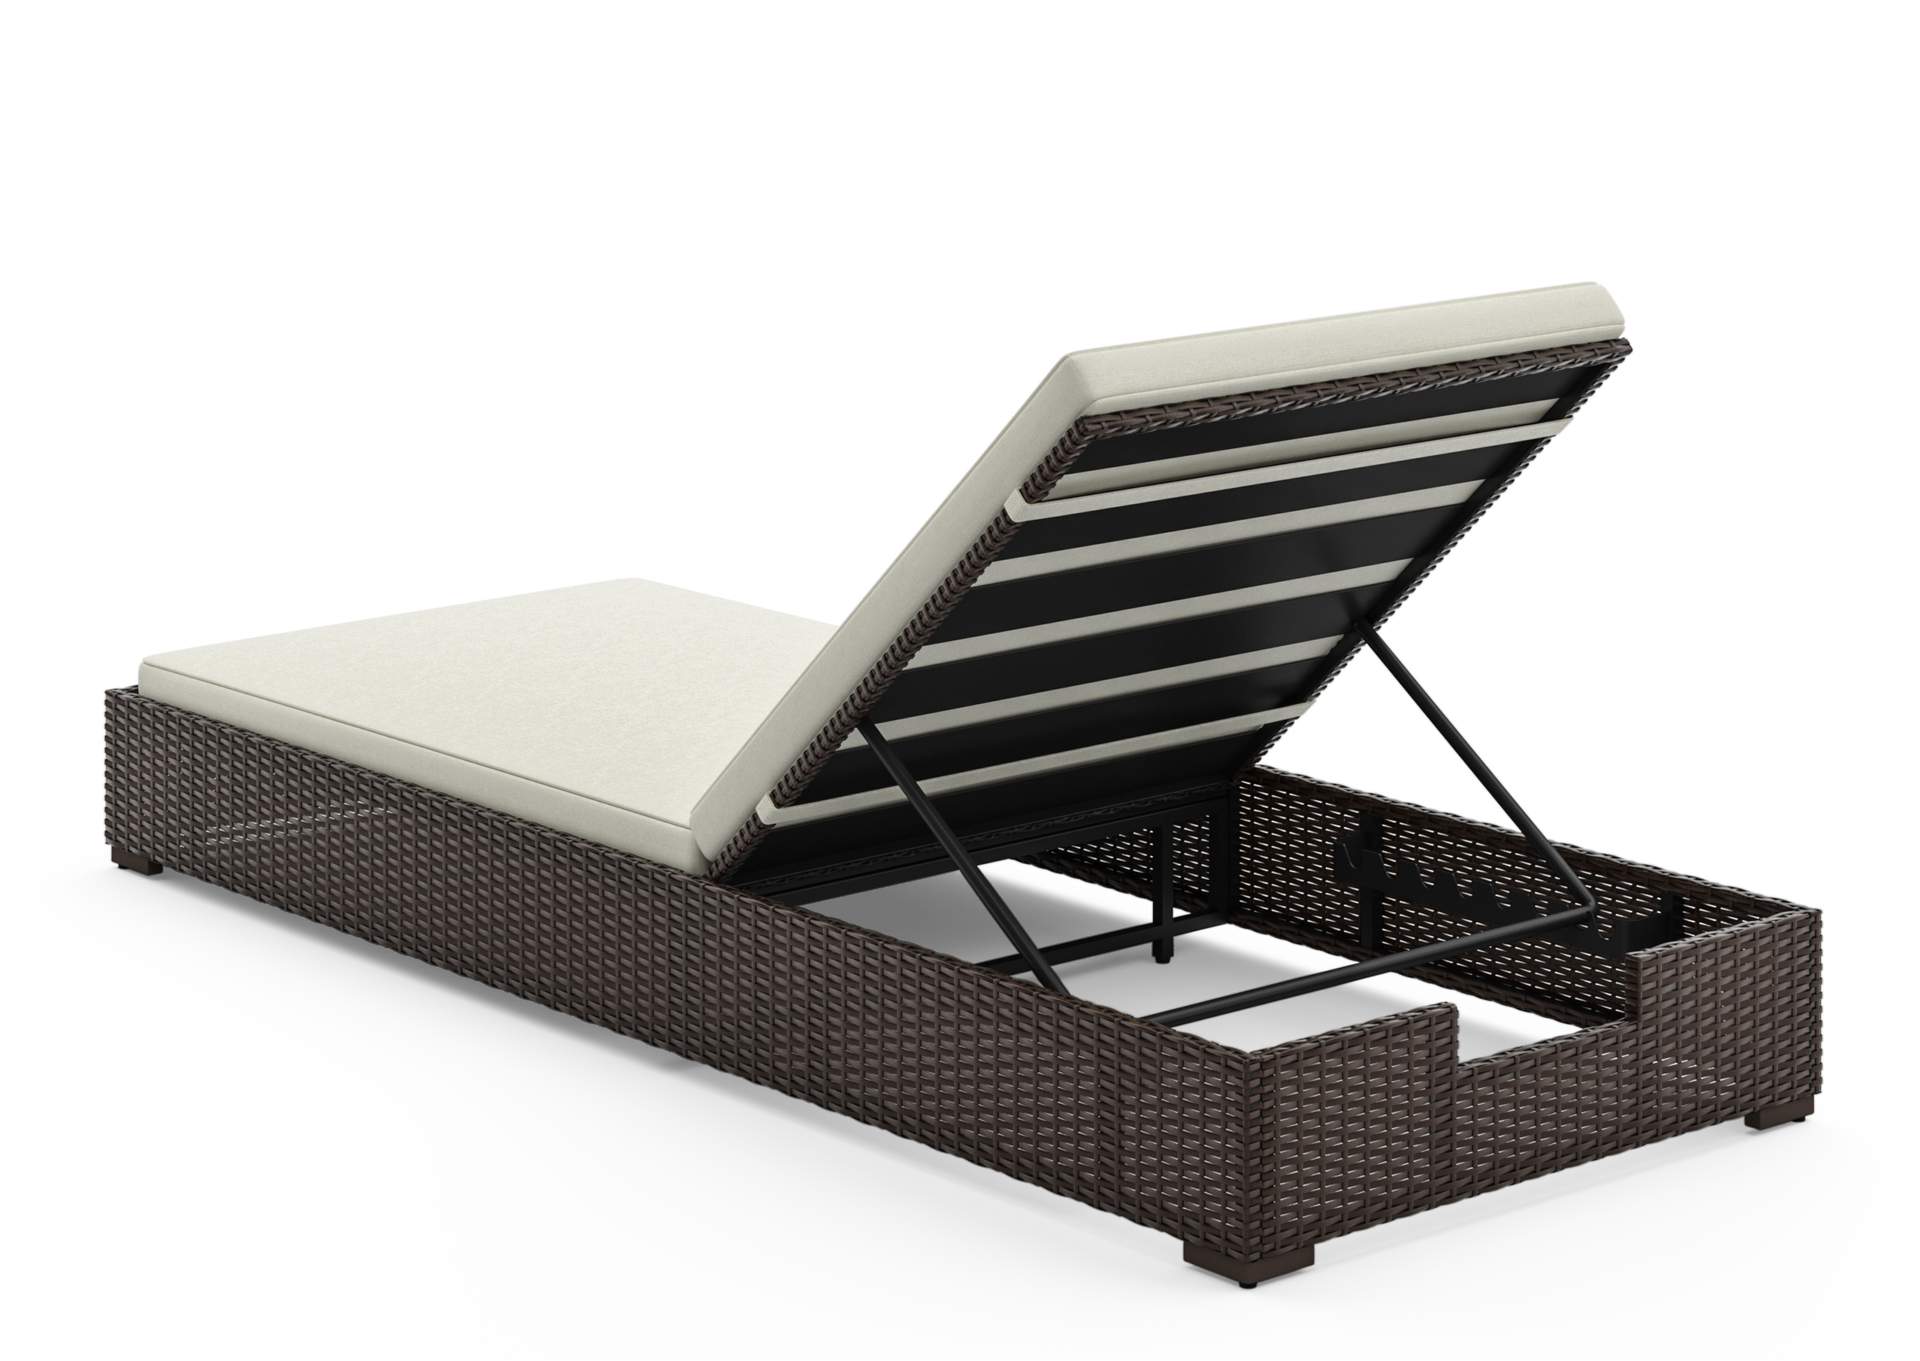 Palm Springs Outdoor Chaise Lounge By Homestyles,Homestyles